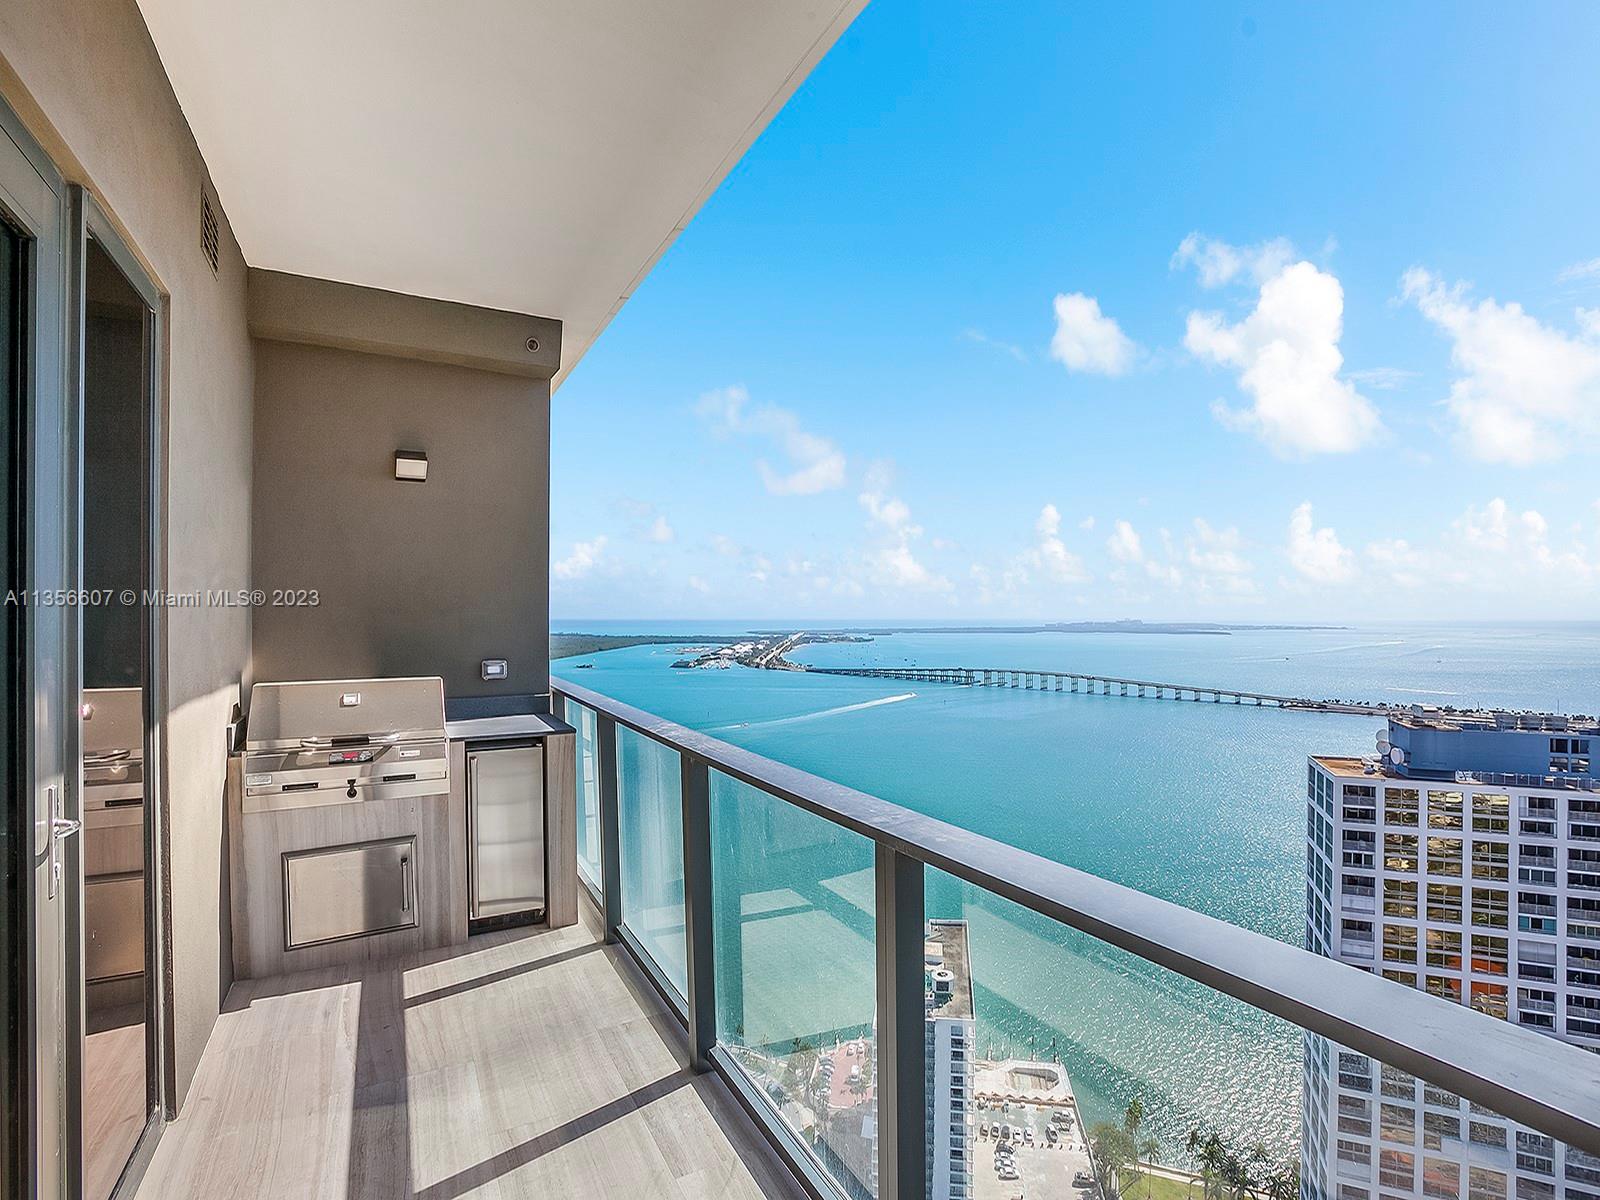 Incredible bay and city views, spectacular 2BED/2.5BATH corner unit at Echo Brickell, a boutique high-rise in the epicenter of Miami’s fastest growing metropolitan neighborhood, located on the East side of Brickell Avenue. Incredible sunrise from the expansive terrace, with summer kitchen with bbq and refrigerator, marble flooring throughout the living spaces elevates the level of grandeur. Italian glass cabinetry, exquisite marble countertops and top-of the line SubZero, Wolf and Bosch appliances. Savant Home Technology, beautiful pool deck, gym and spa with panoramic views of Biscayne Bay and Miami Skyline. 24/7 concierge and valet. Restaurant Toscanino at pool deck, Joe and the Juice, and Rosetta Bakery on site.